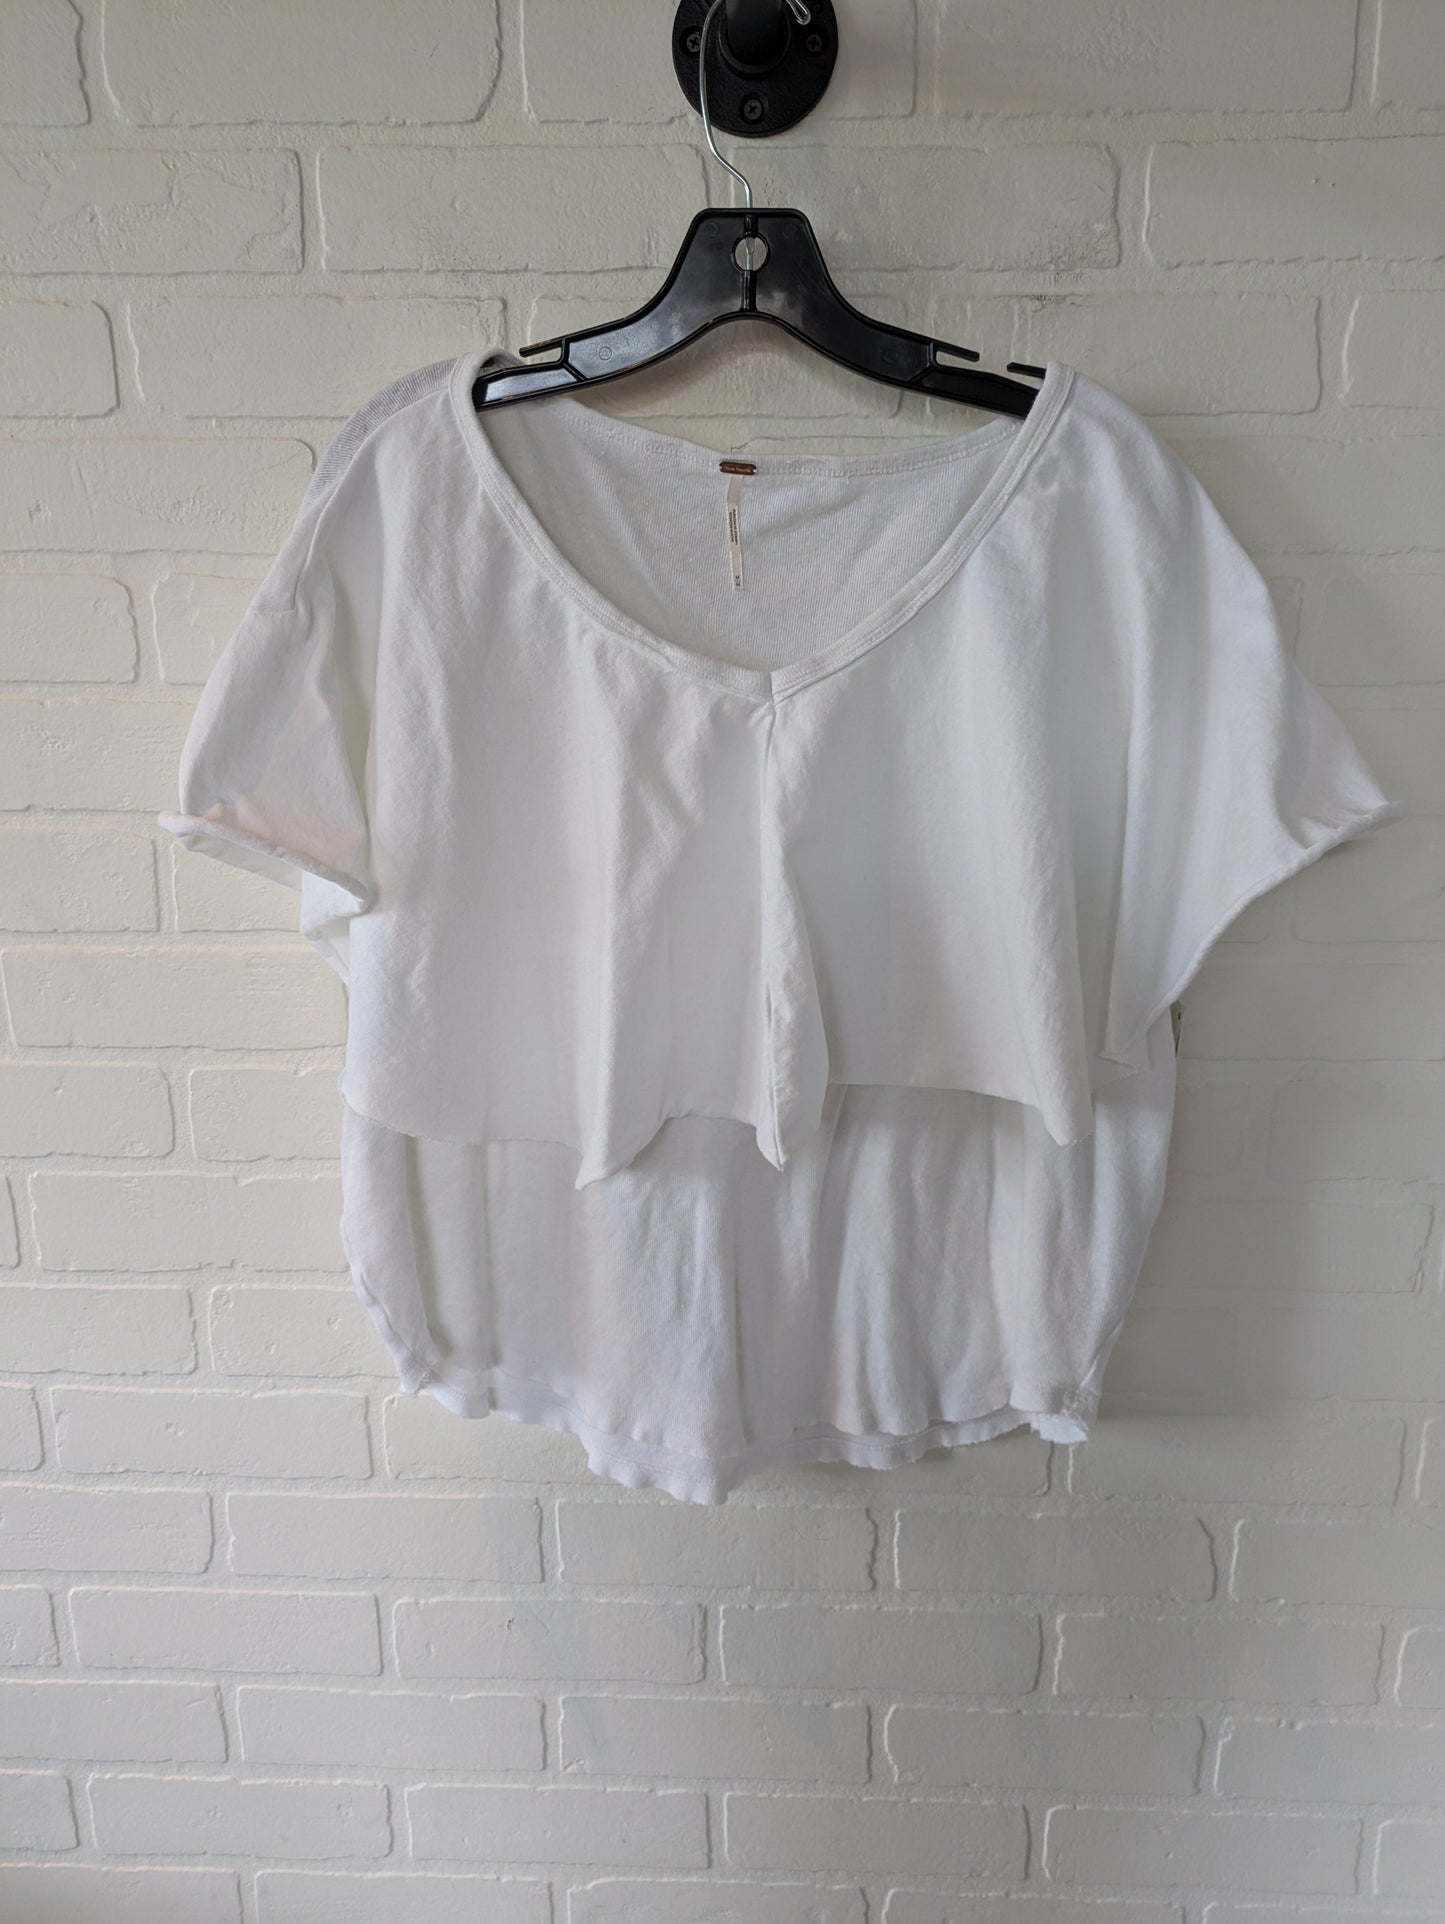 White Top Short Sleeve Free People, Size M